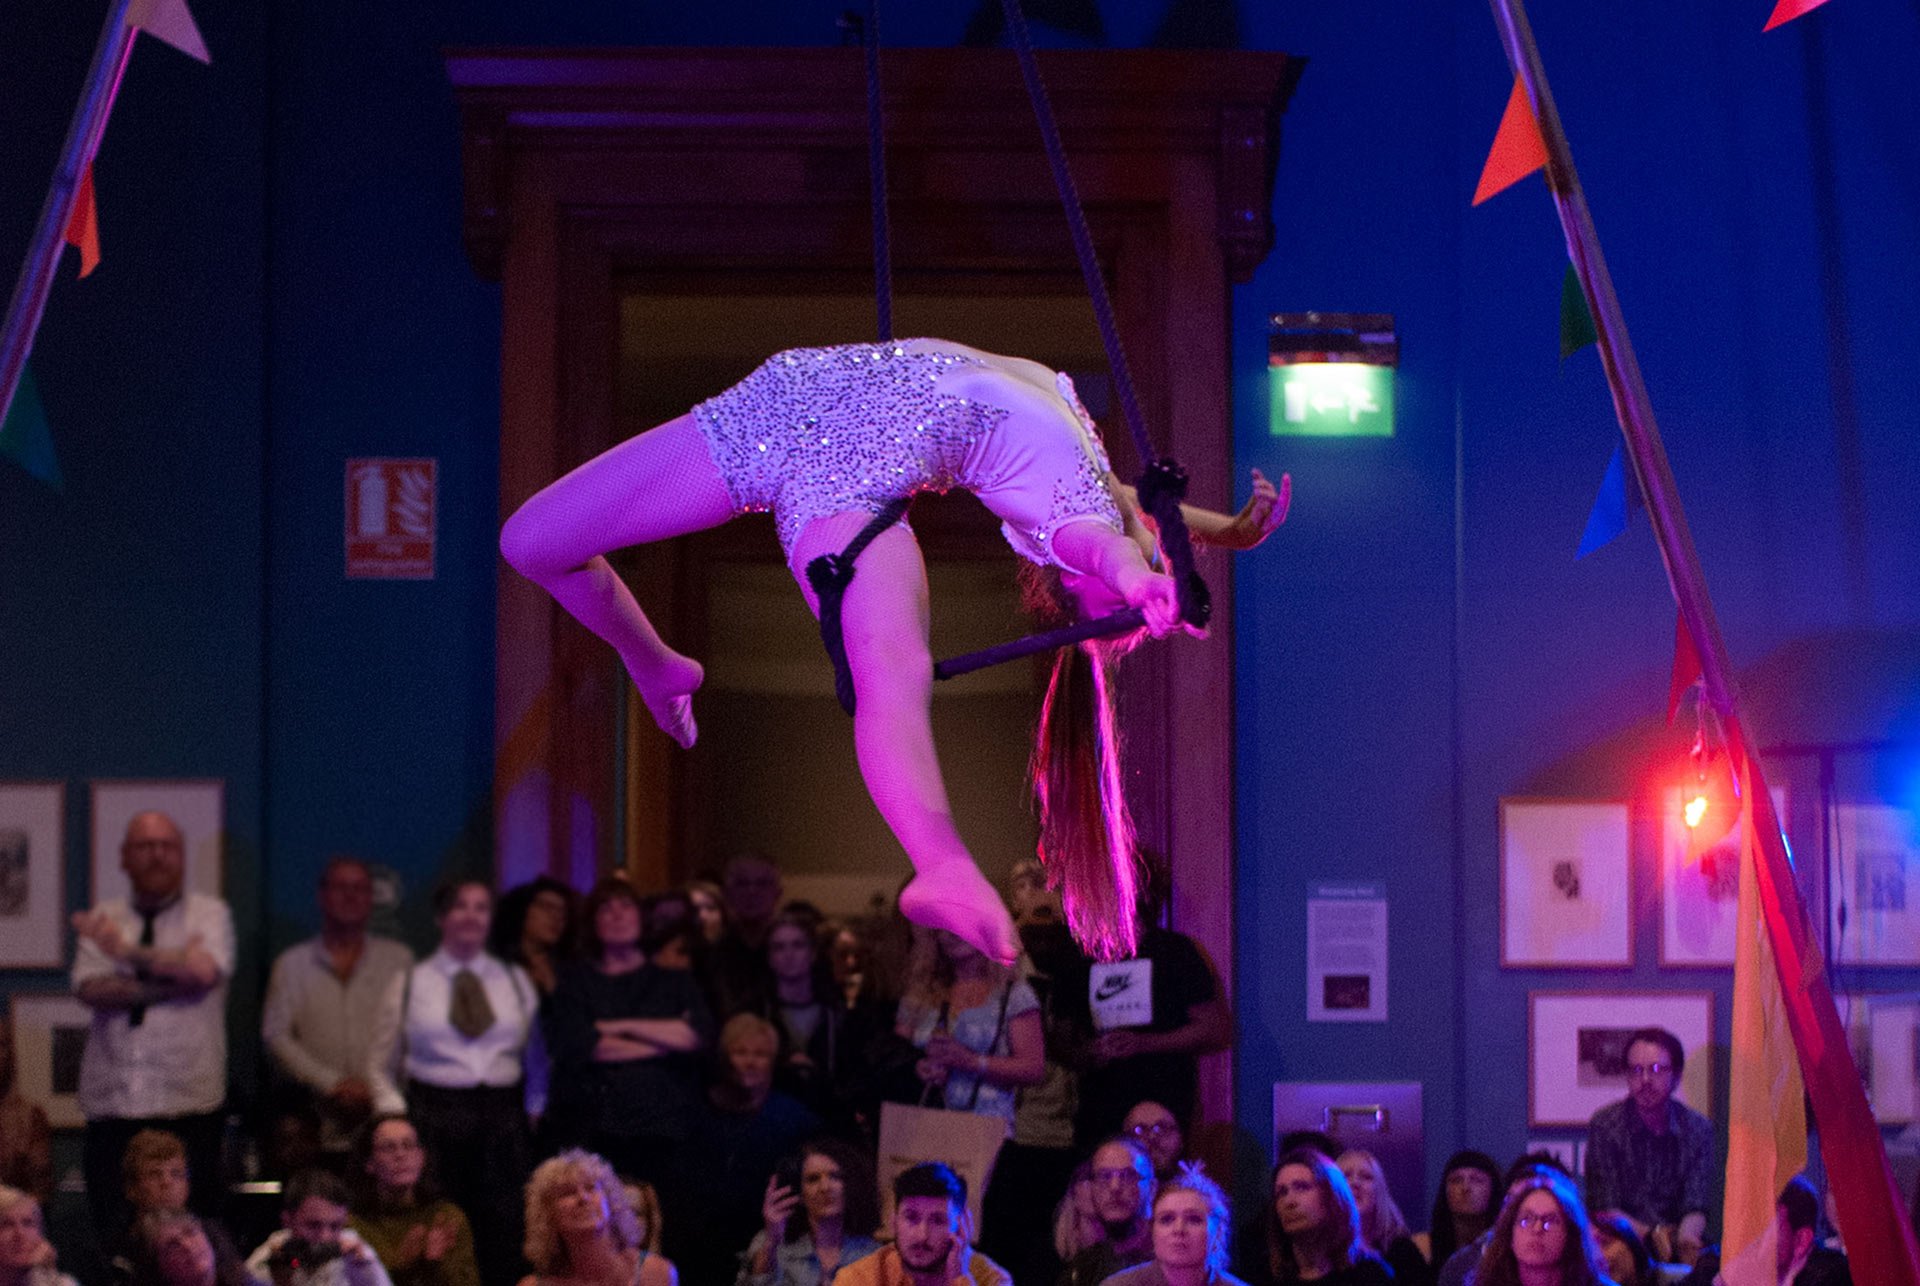 a-circus-gymnast-spinning-in-the-air-while-hanging-on-a-rope-with-a-rim-in-the-Weston-Park-Gallery-in-Sheffield-UK-with-an-audience-surrounding-her